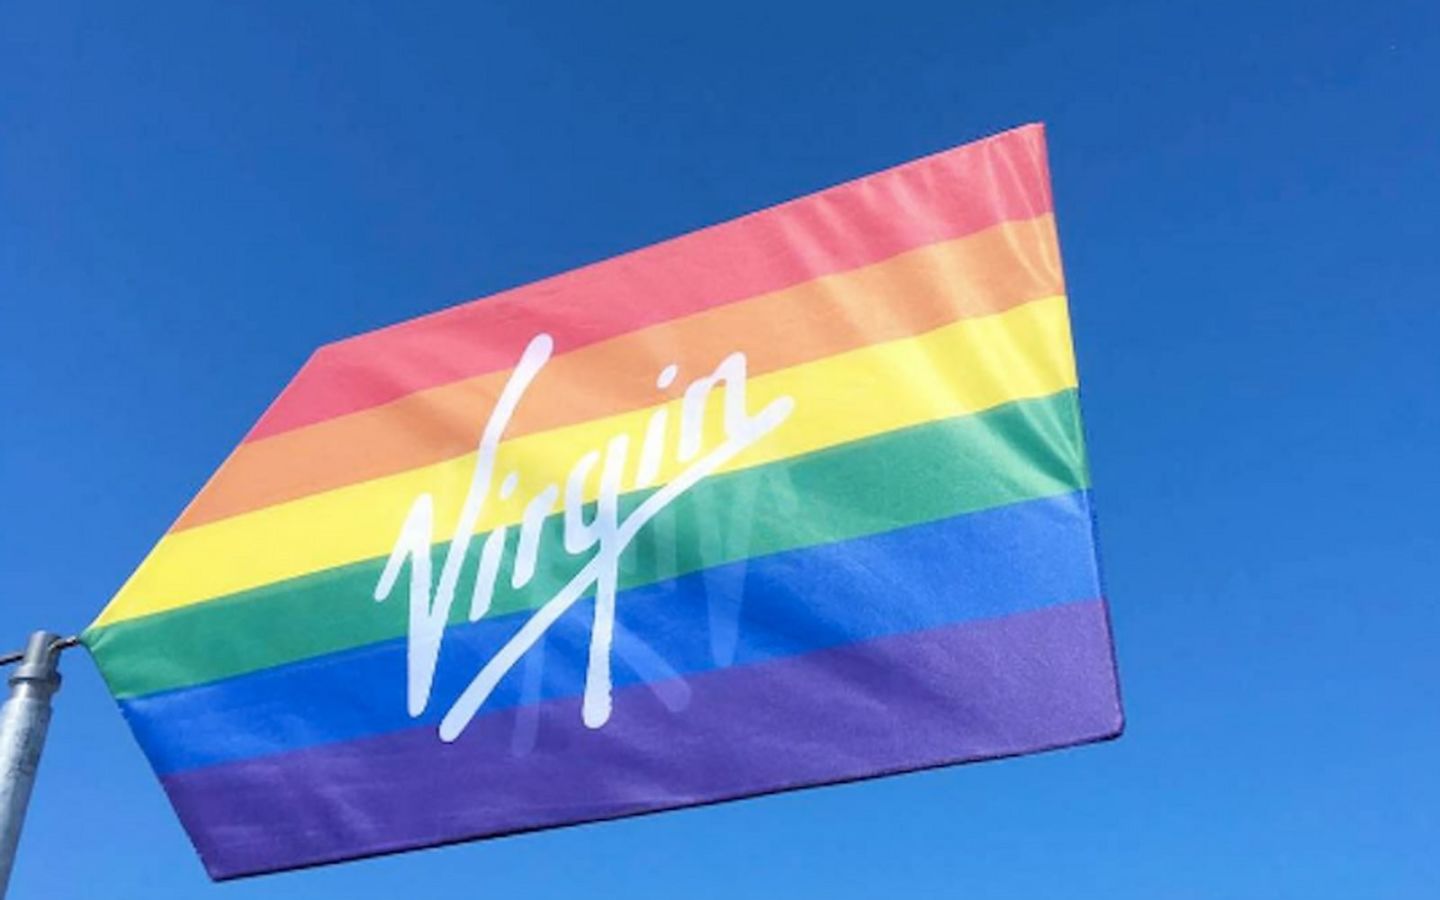 The Pride flag with the Virgin logo across it in white text